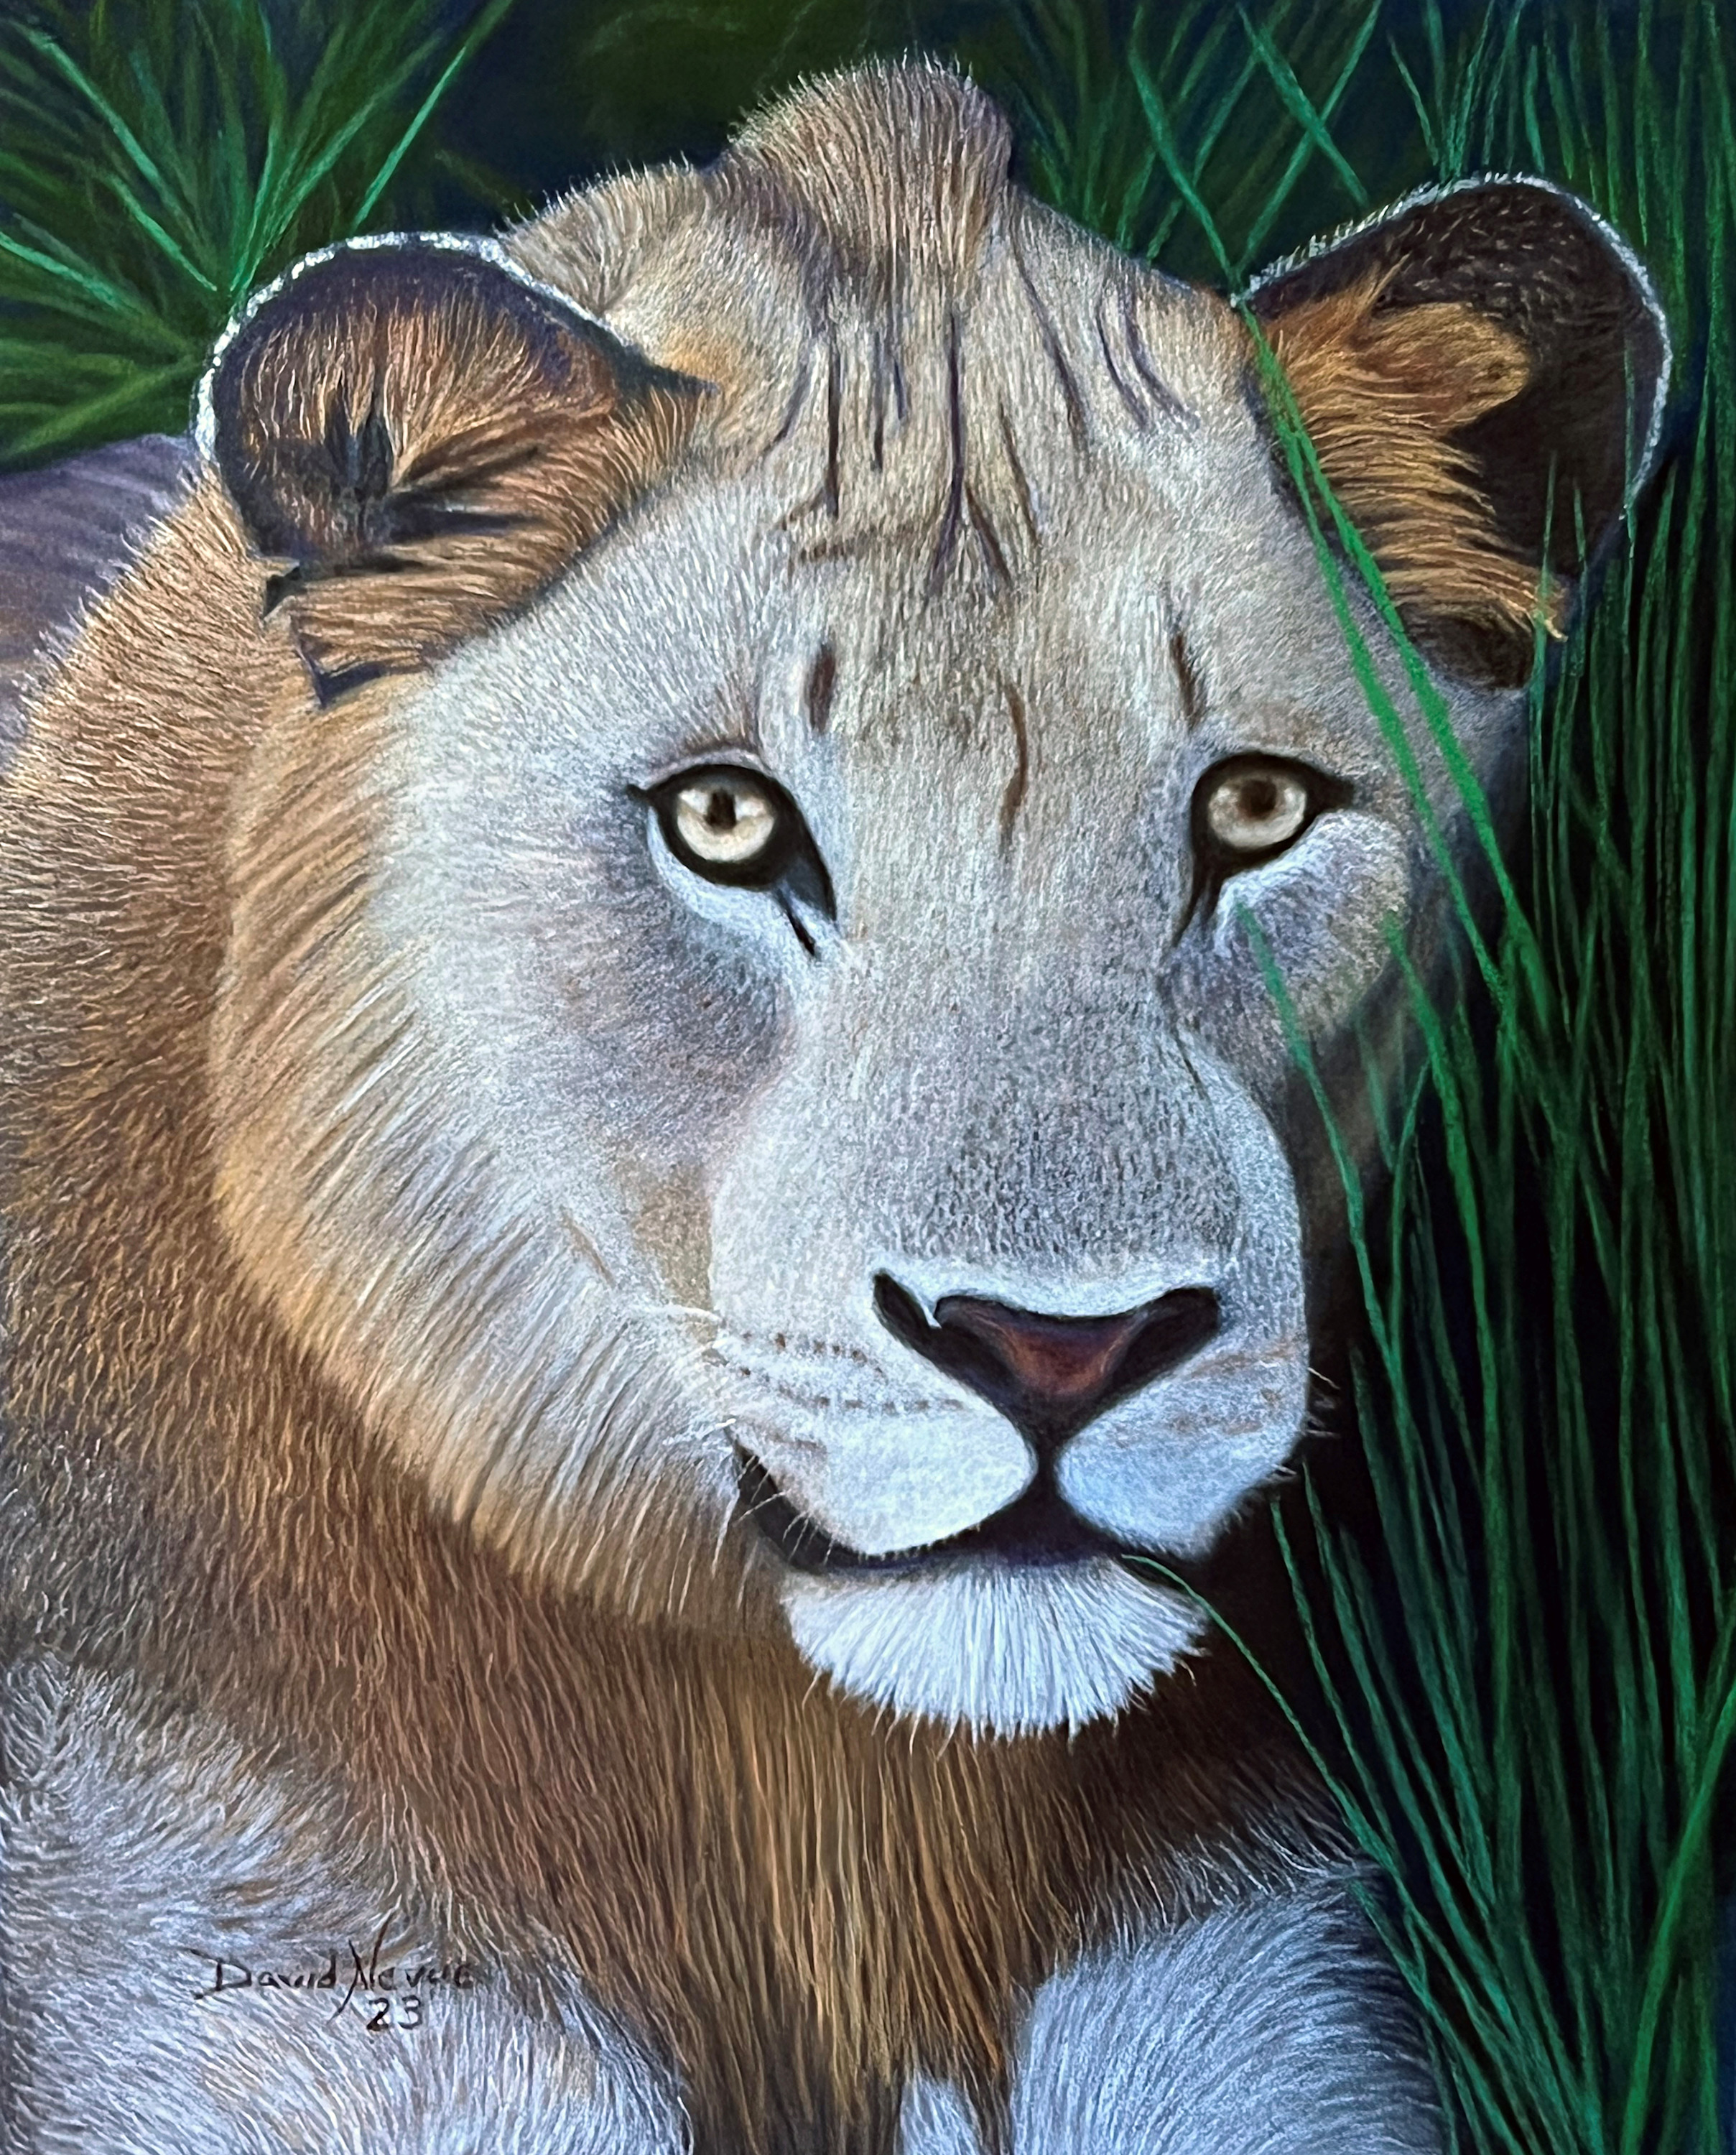 Dave nevue   king of the jungle lion art   8 x 10  900xs jzalfl